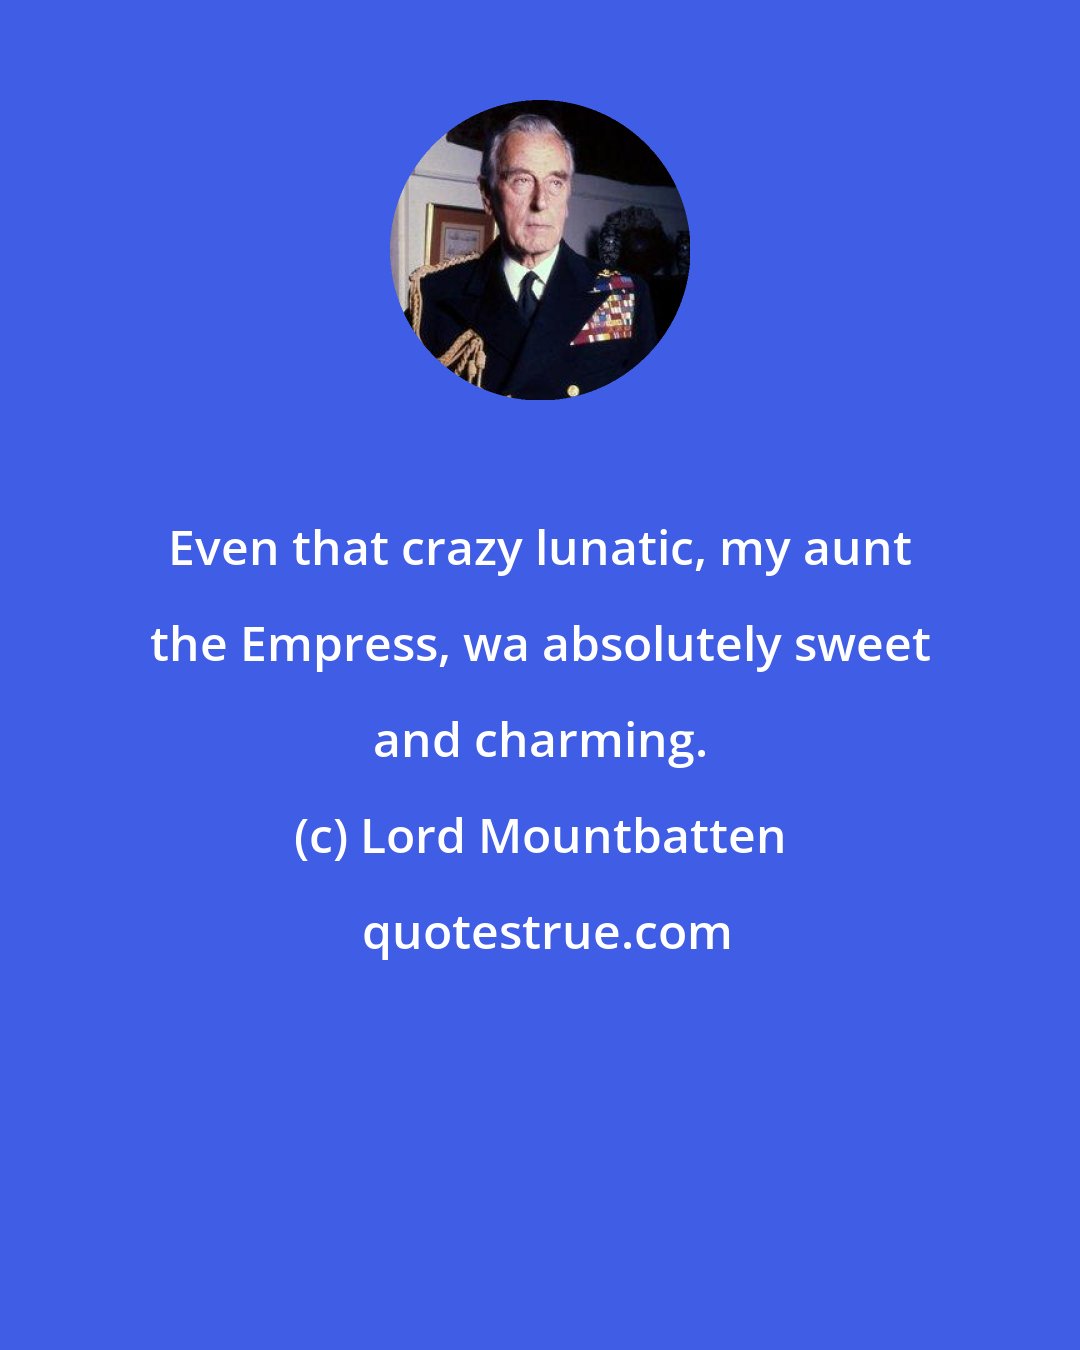 Lord Mountbatten: Even that crazy lunatic, my aunt the Empress, wa absolutely sweet and charming.